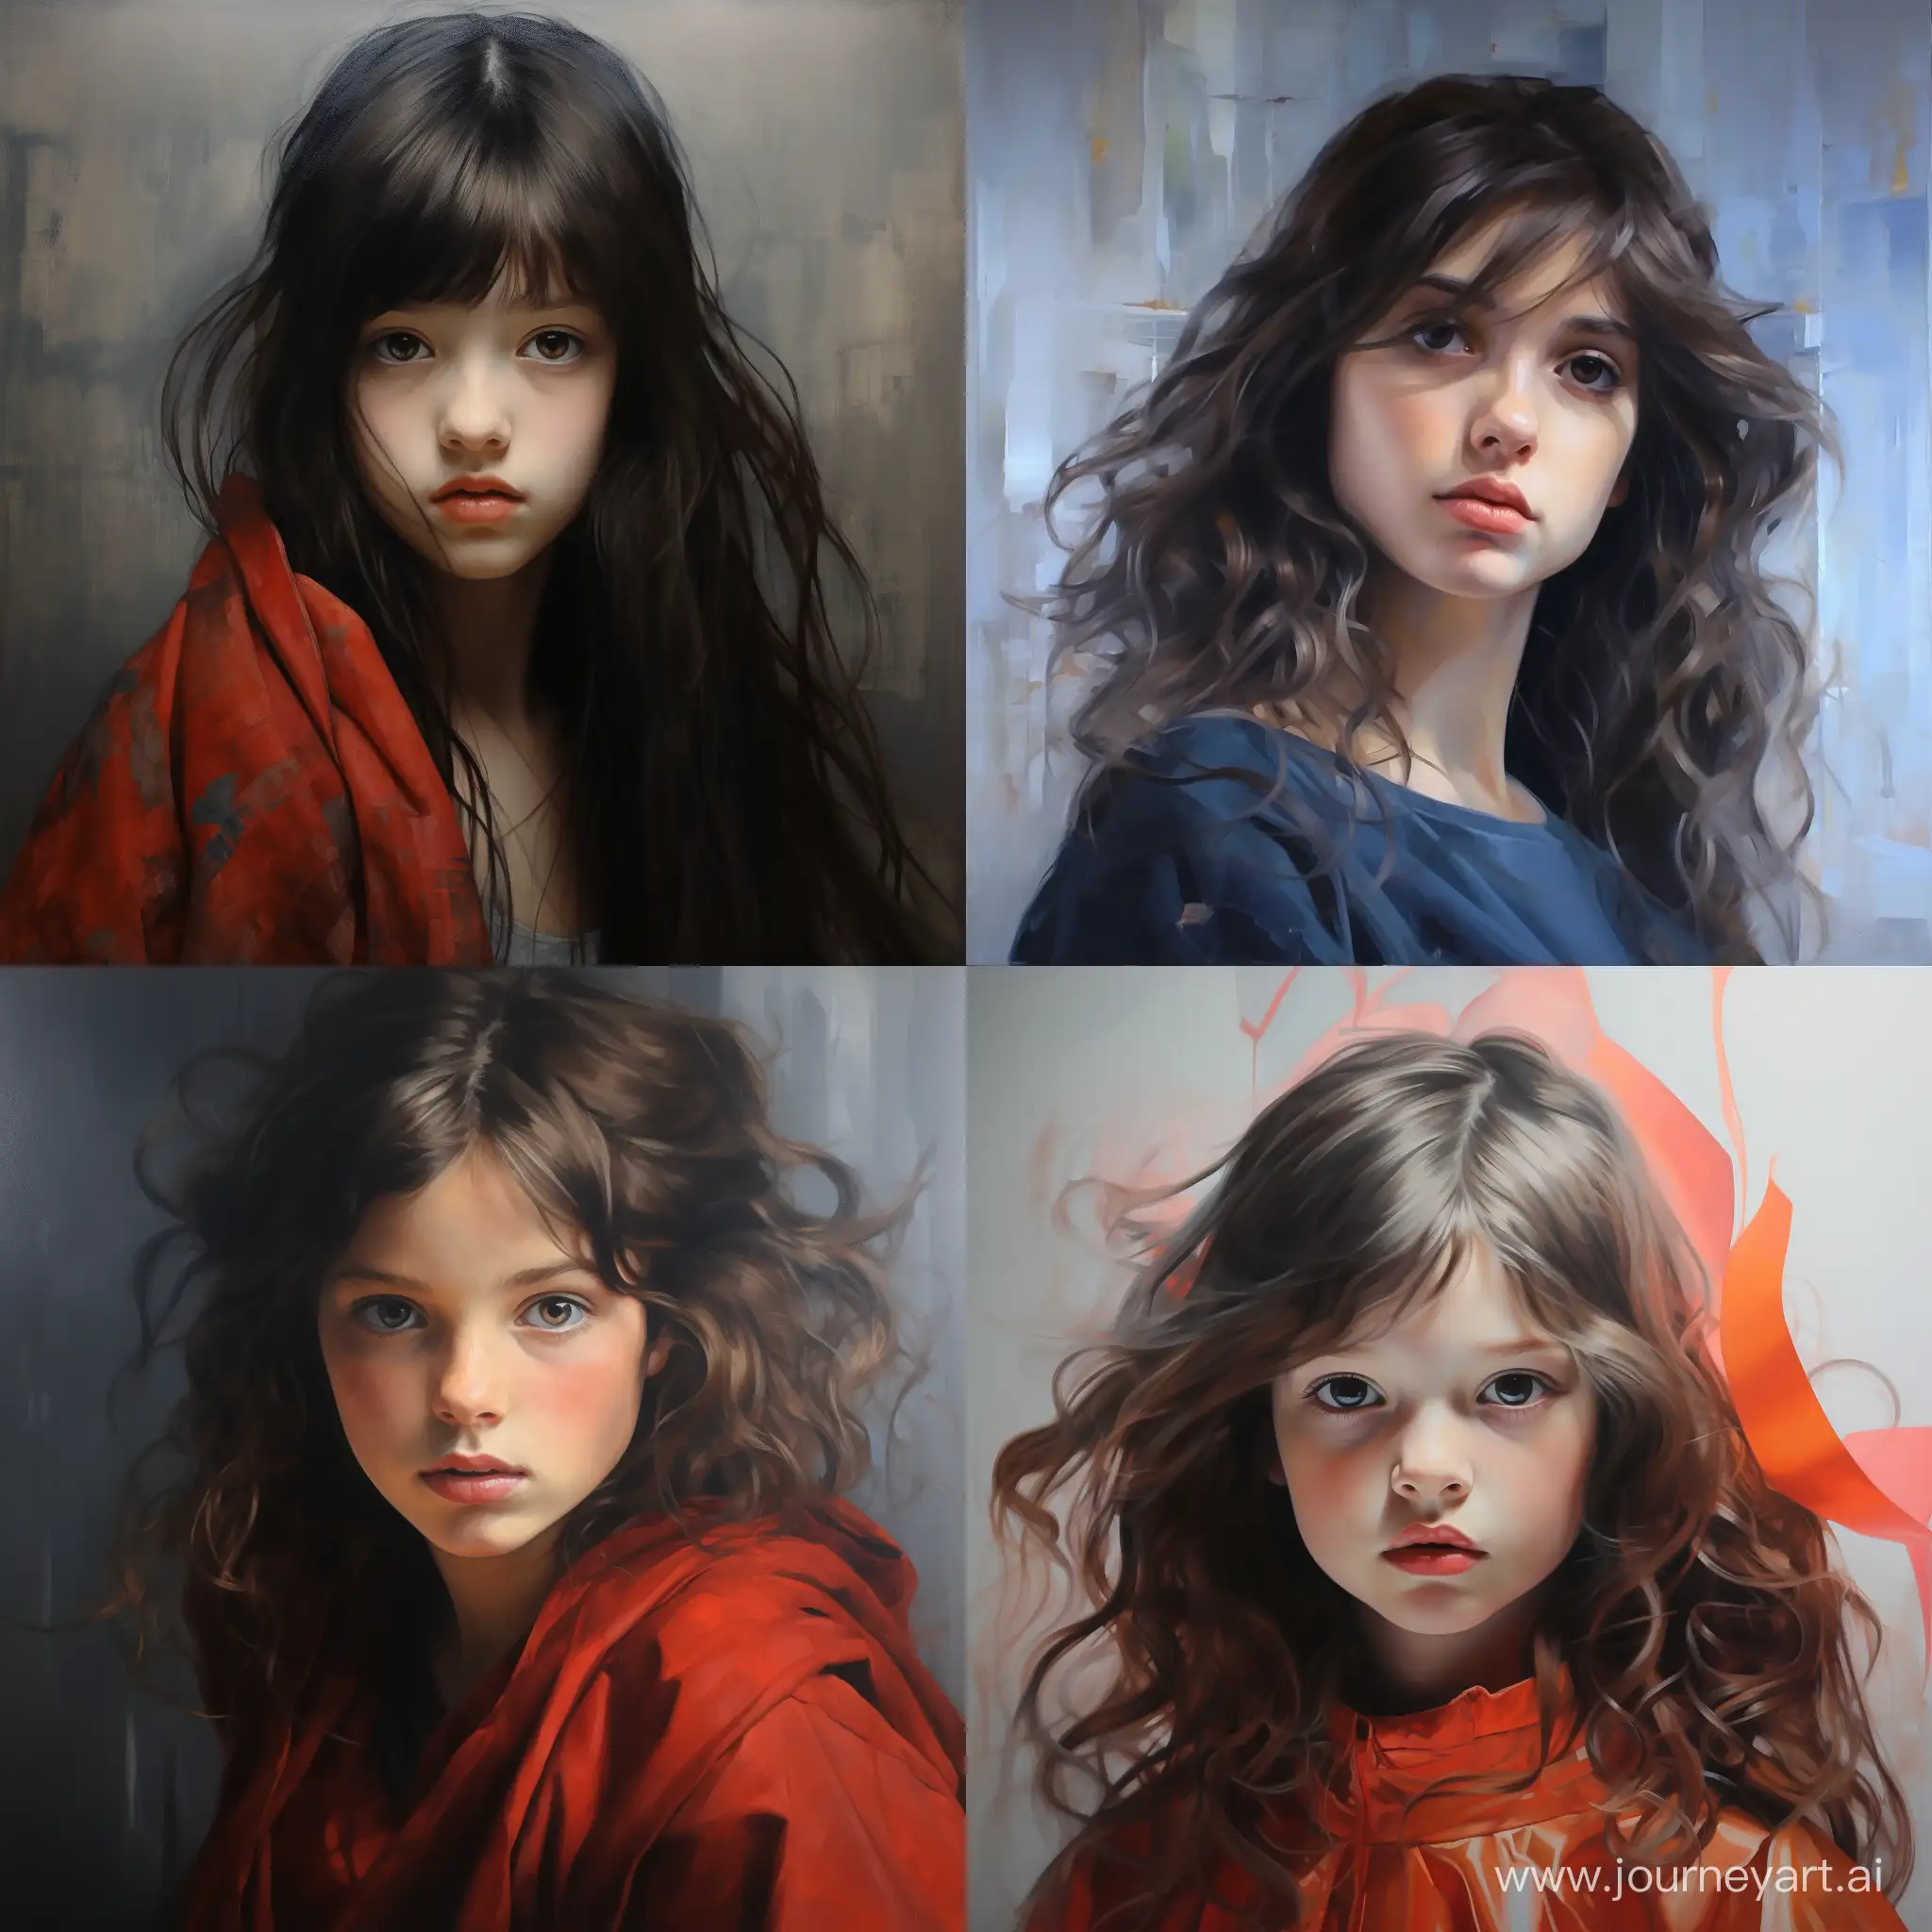 Young-Girl-in-a-11-Aspect-Ratio-Artwork